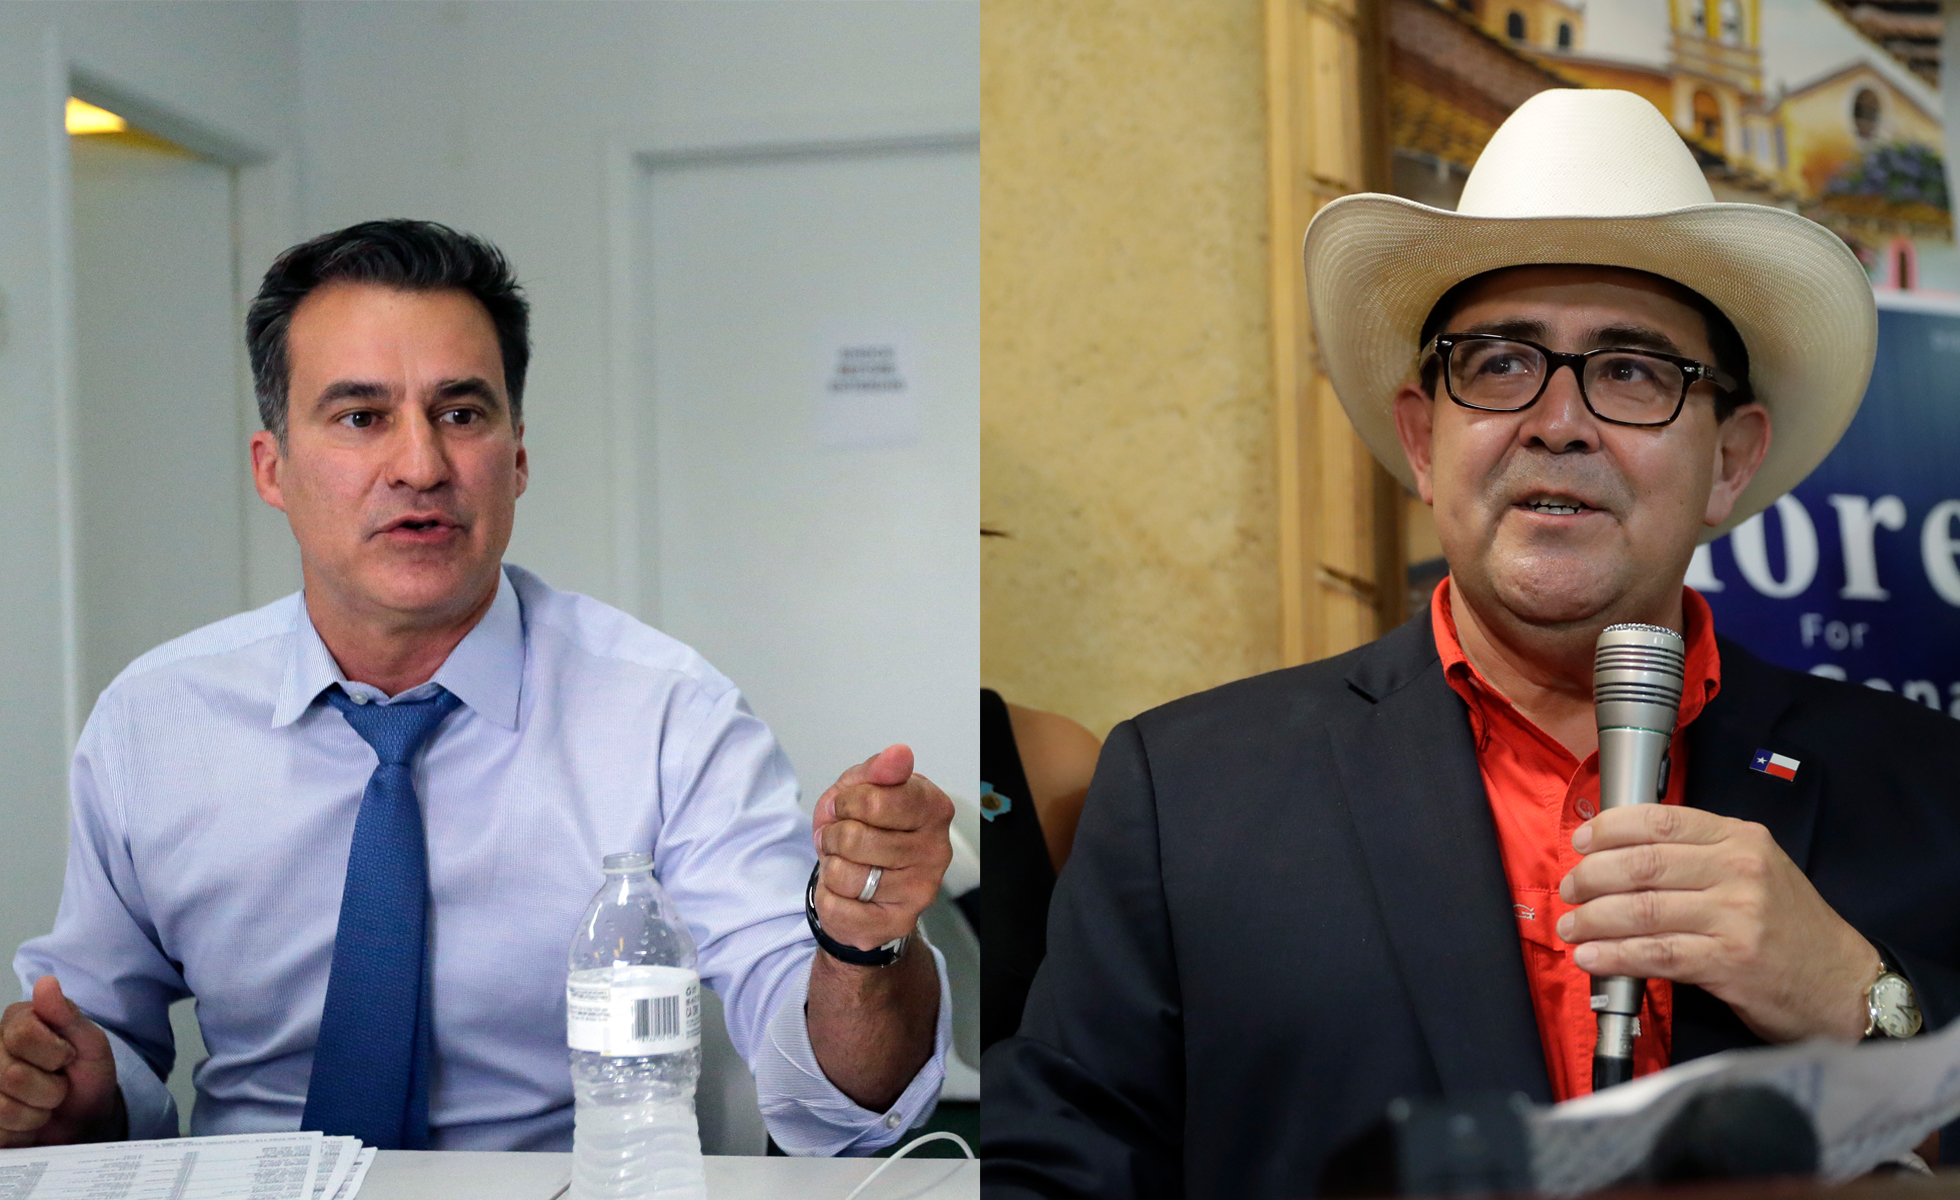 Roland Gutierrez, a current state representative, makes a video update as he campaigns with his volunteers, Tuesday, July 31, 2018, in San Antonio. and Republican Pete Flores, center, stands with his daughter Vicky, left, and state Sen. Donna Campbell, right, as he talks to supports after he defeated Democrat Pete Gallego in a runoff election capturing a reliably blue state Senate seat, Tuesday, Sept. 18, 2018, in San Antonio.